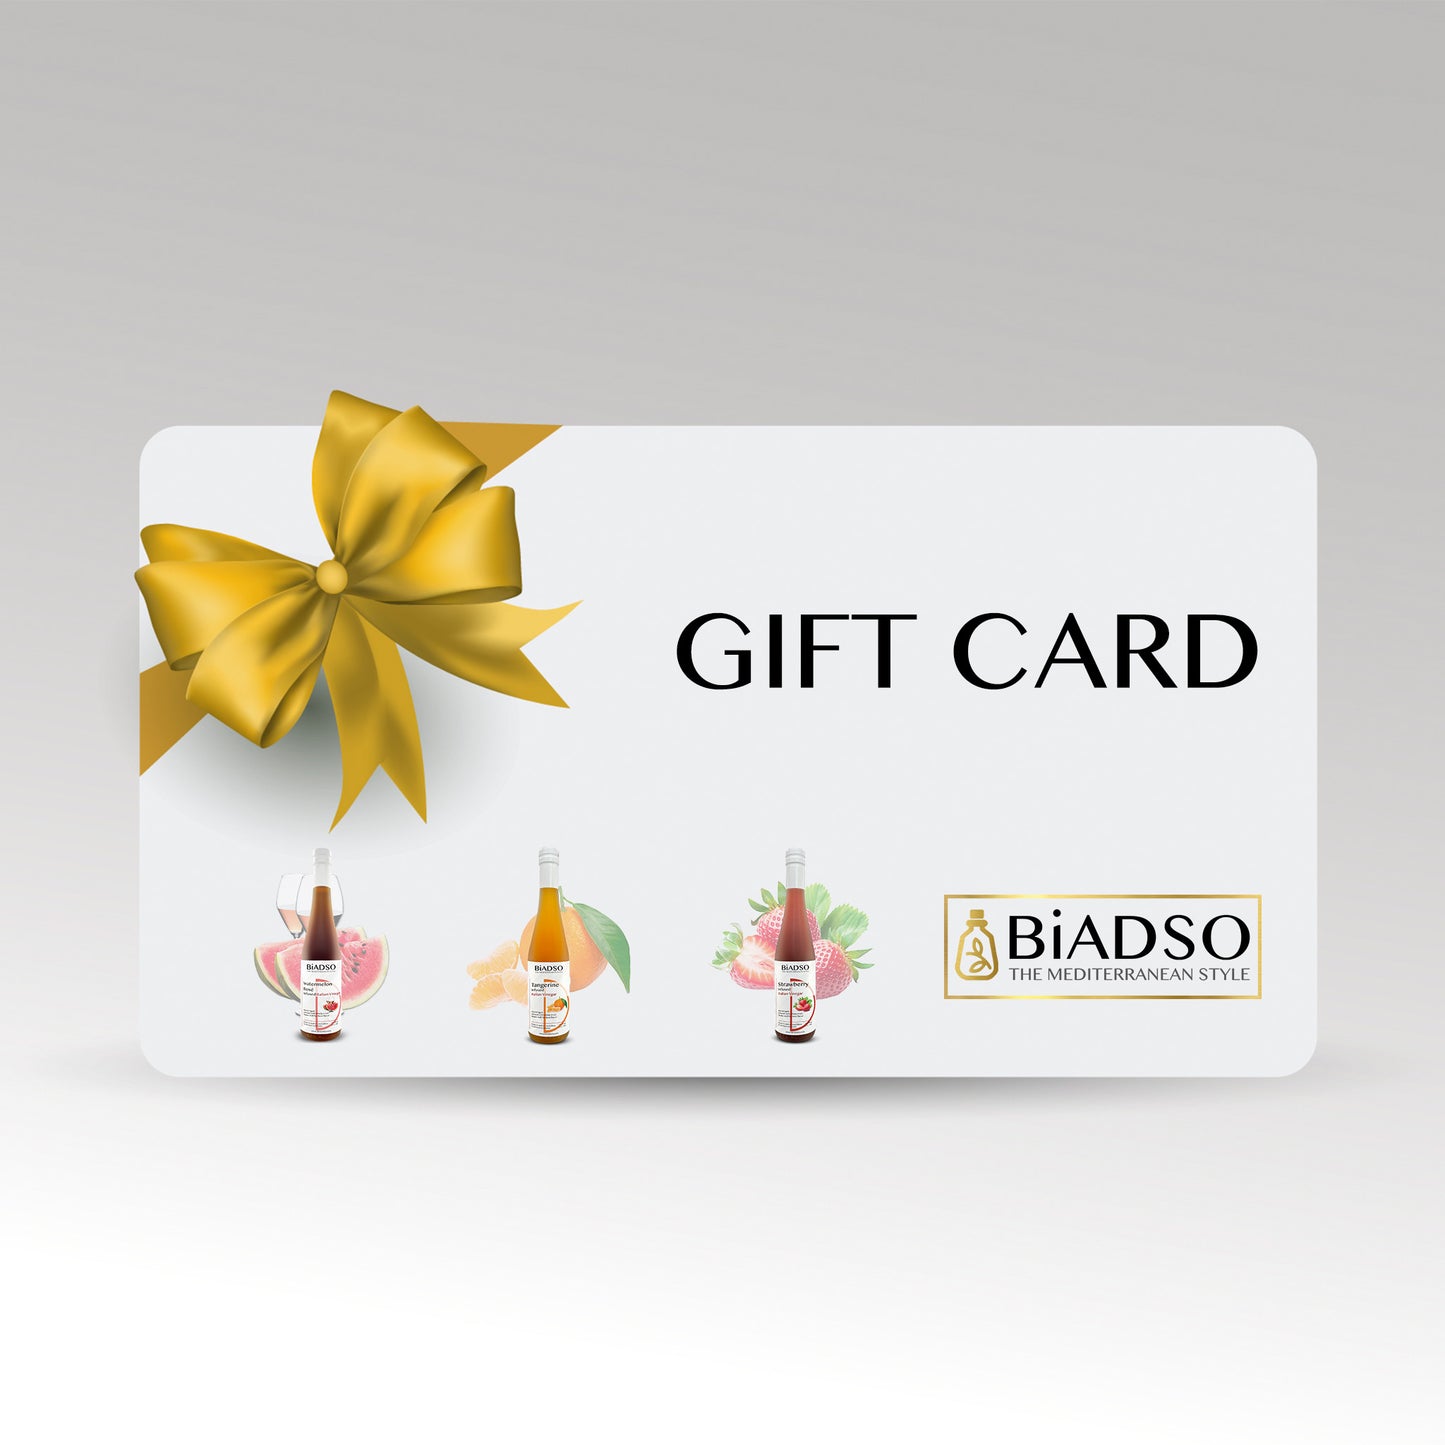 Gift Card BiADSO Mediterranean Style Olive Oil and Balsamic Vinegar